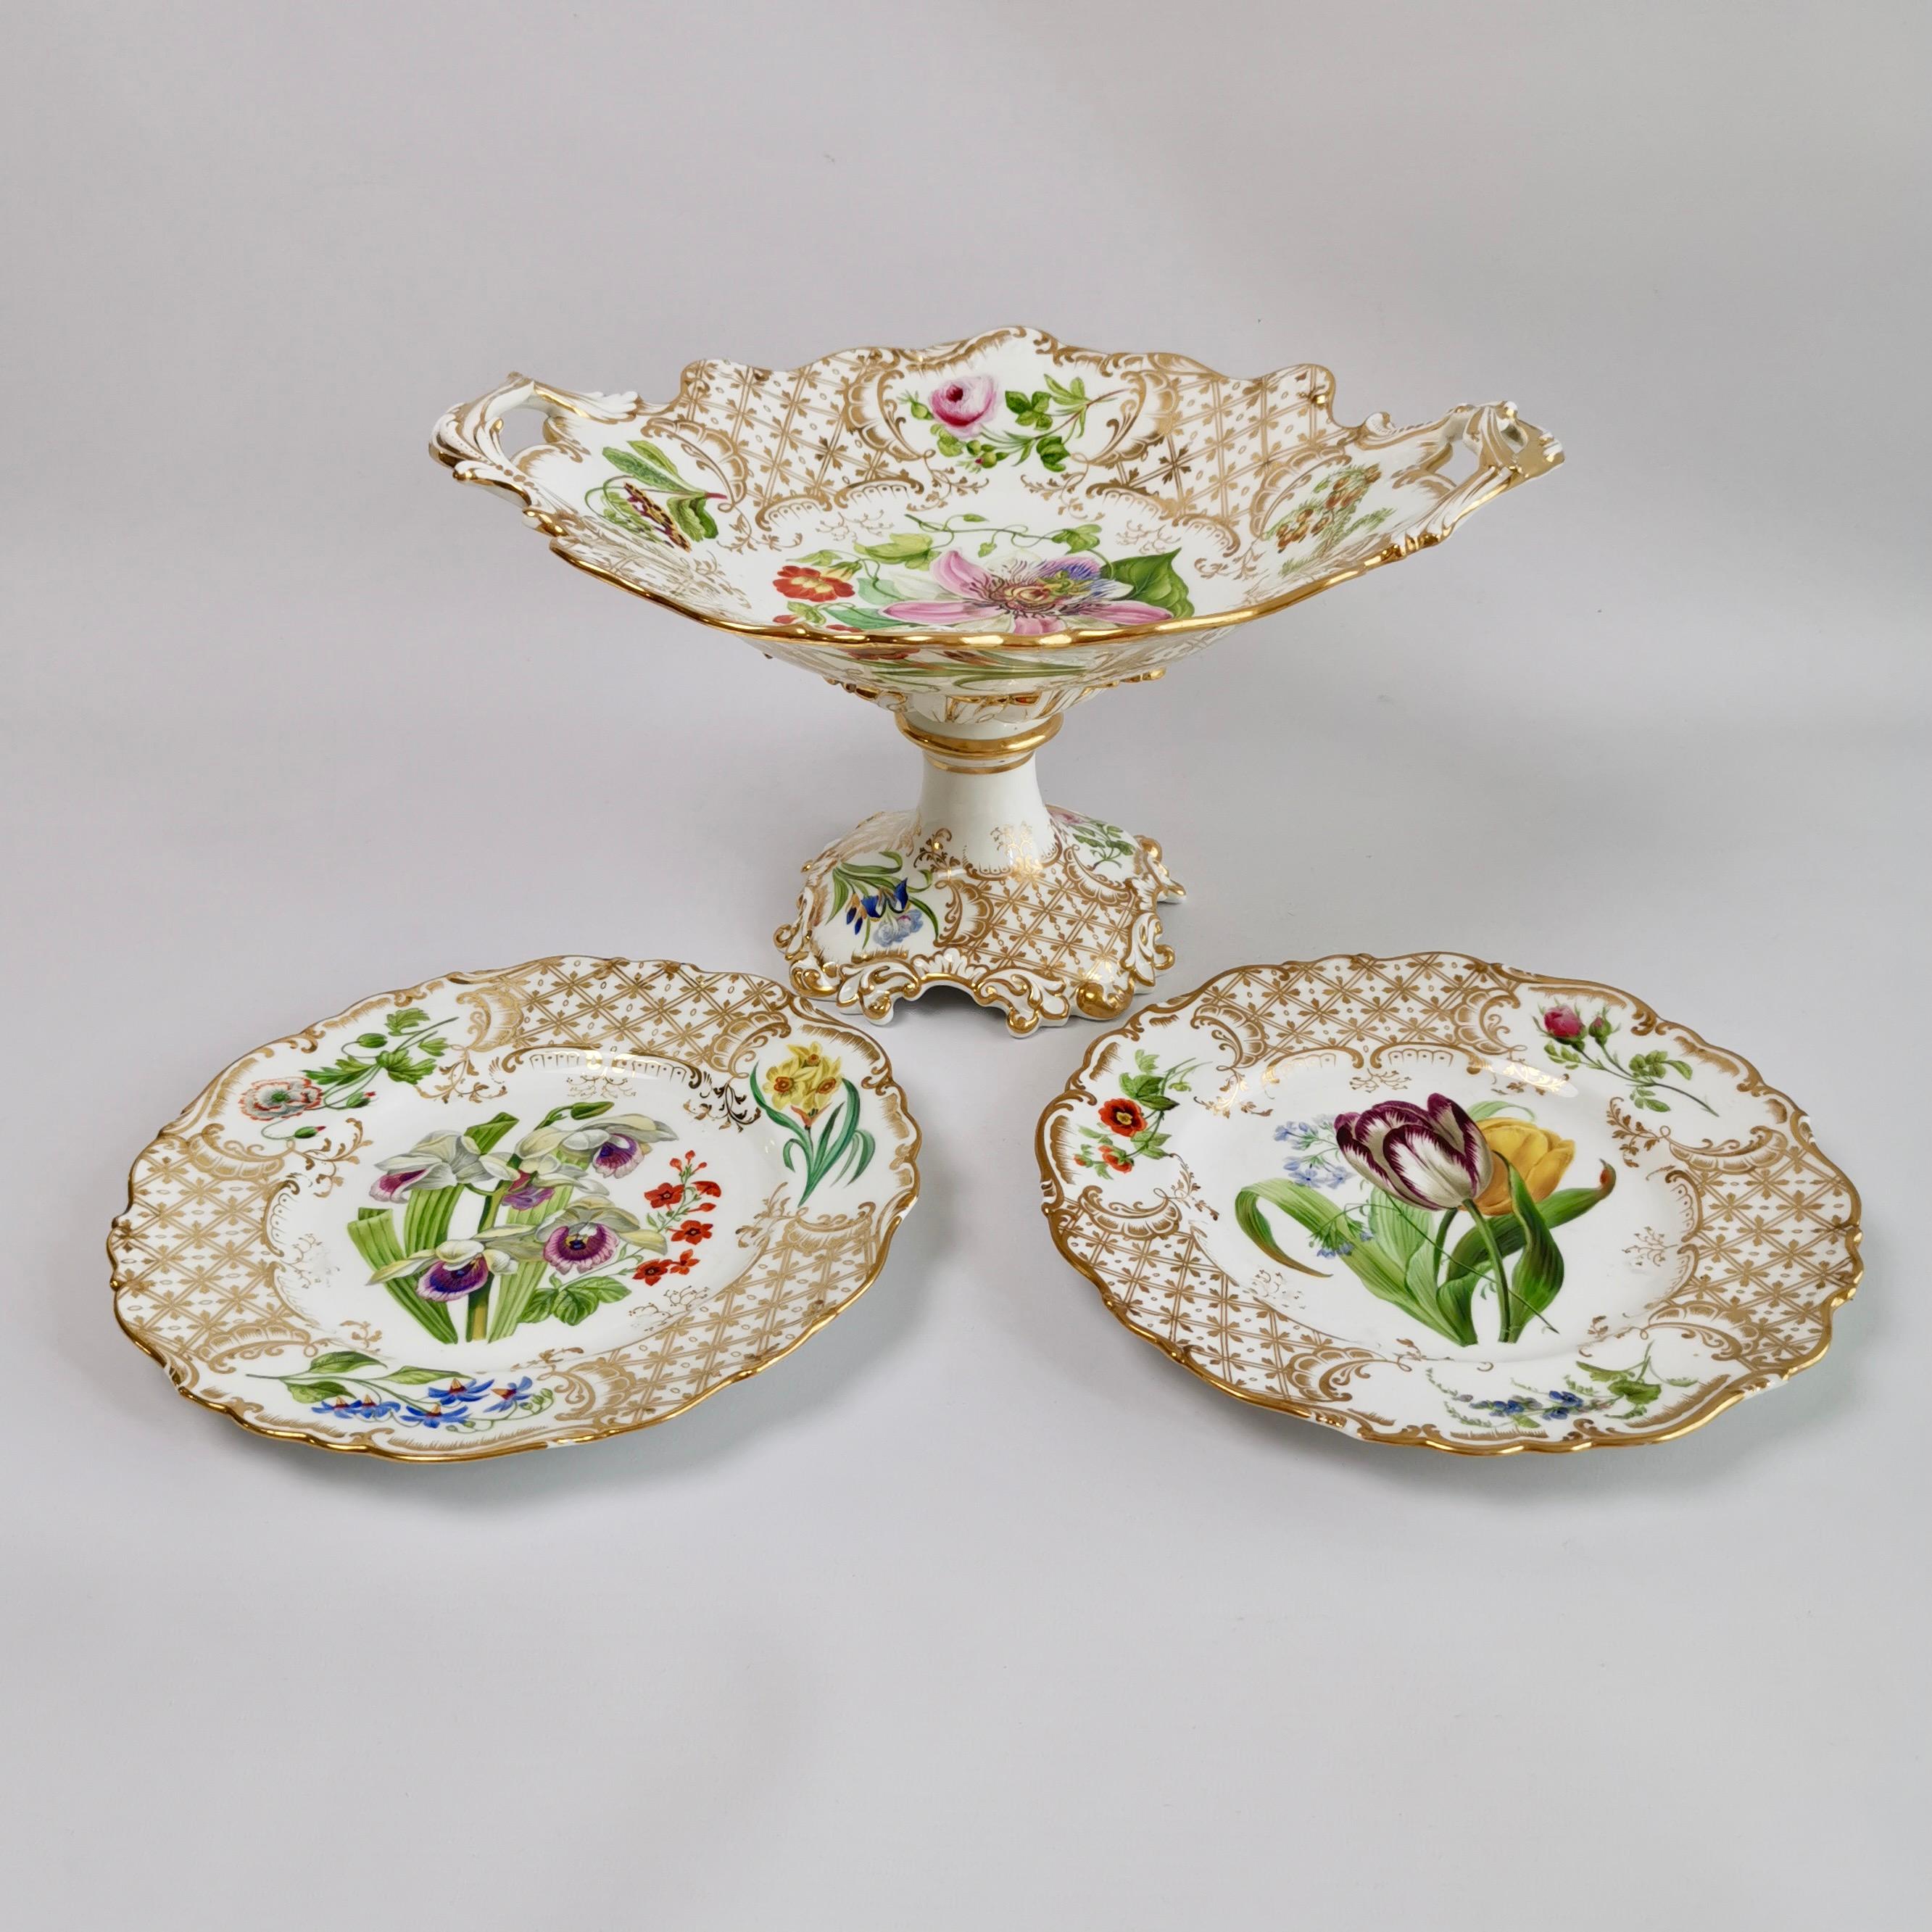 This is a stunning high footed comport made by Ridgway some time between 1845 and 1850. It would have been the centre piece of a large dessert service. The comport is beautifully shaped and has a rich decoration of lavish gilt and stunning hand